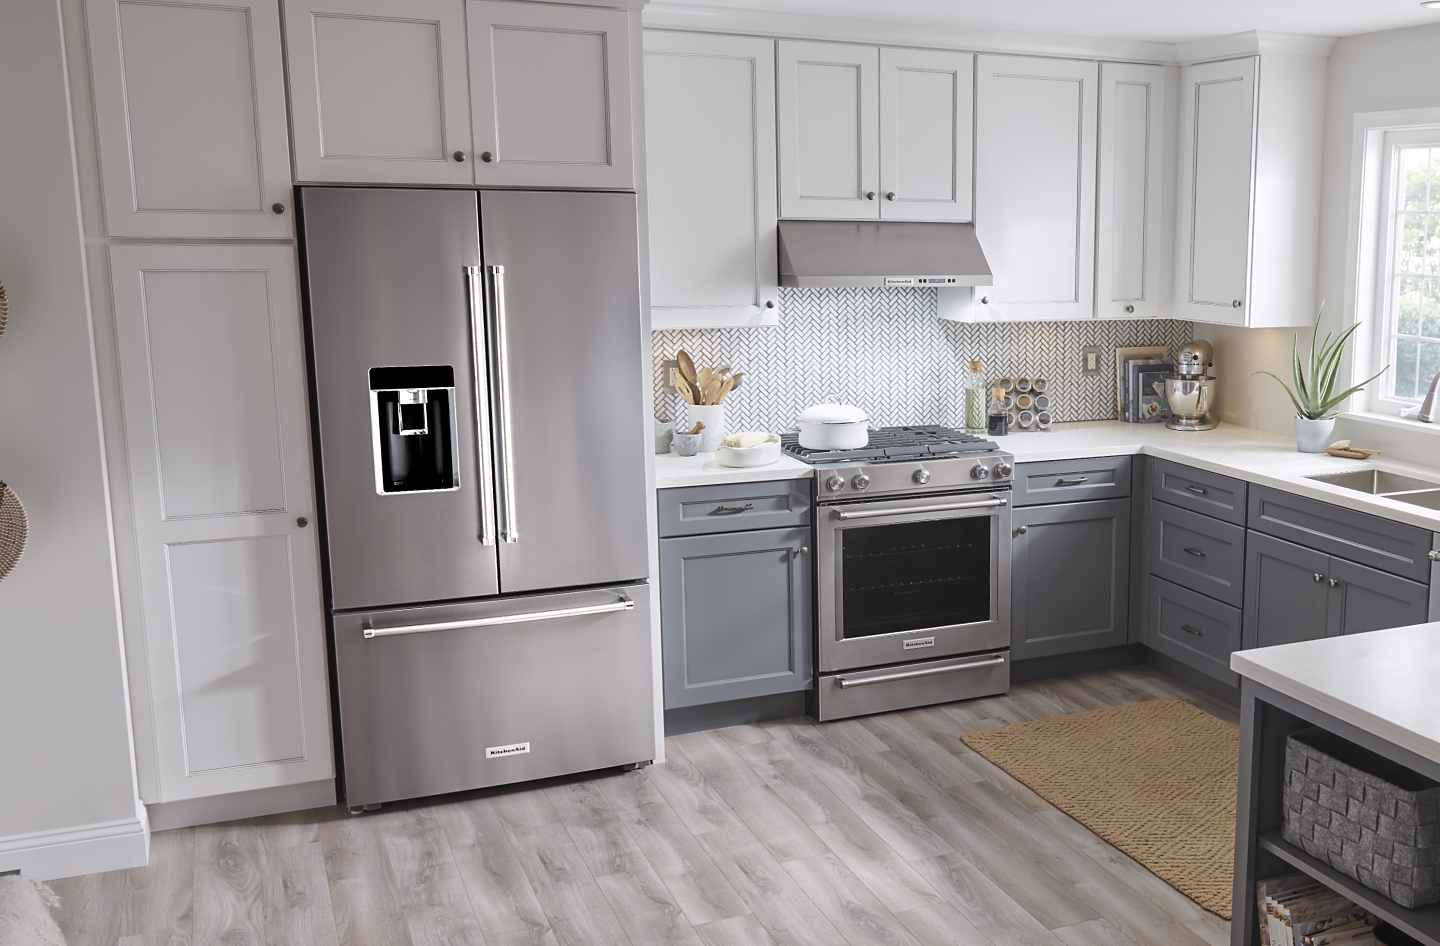 Tips on Refrigerator Placement in the Kitchen